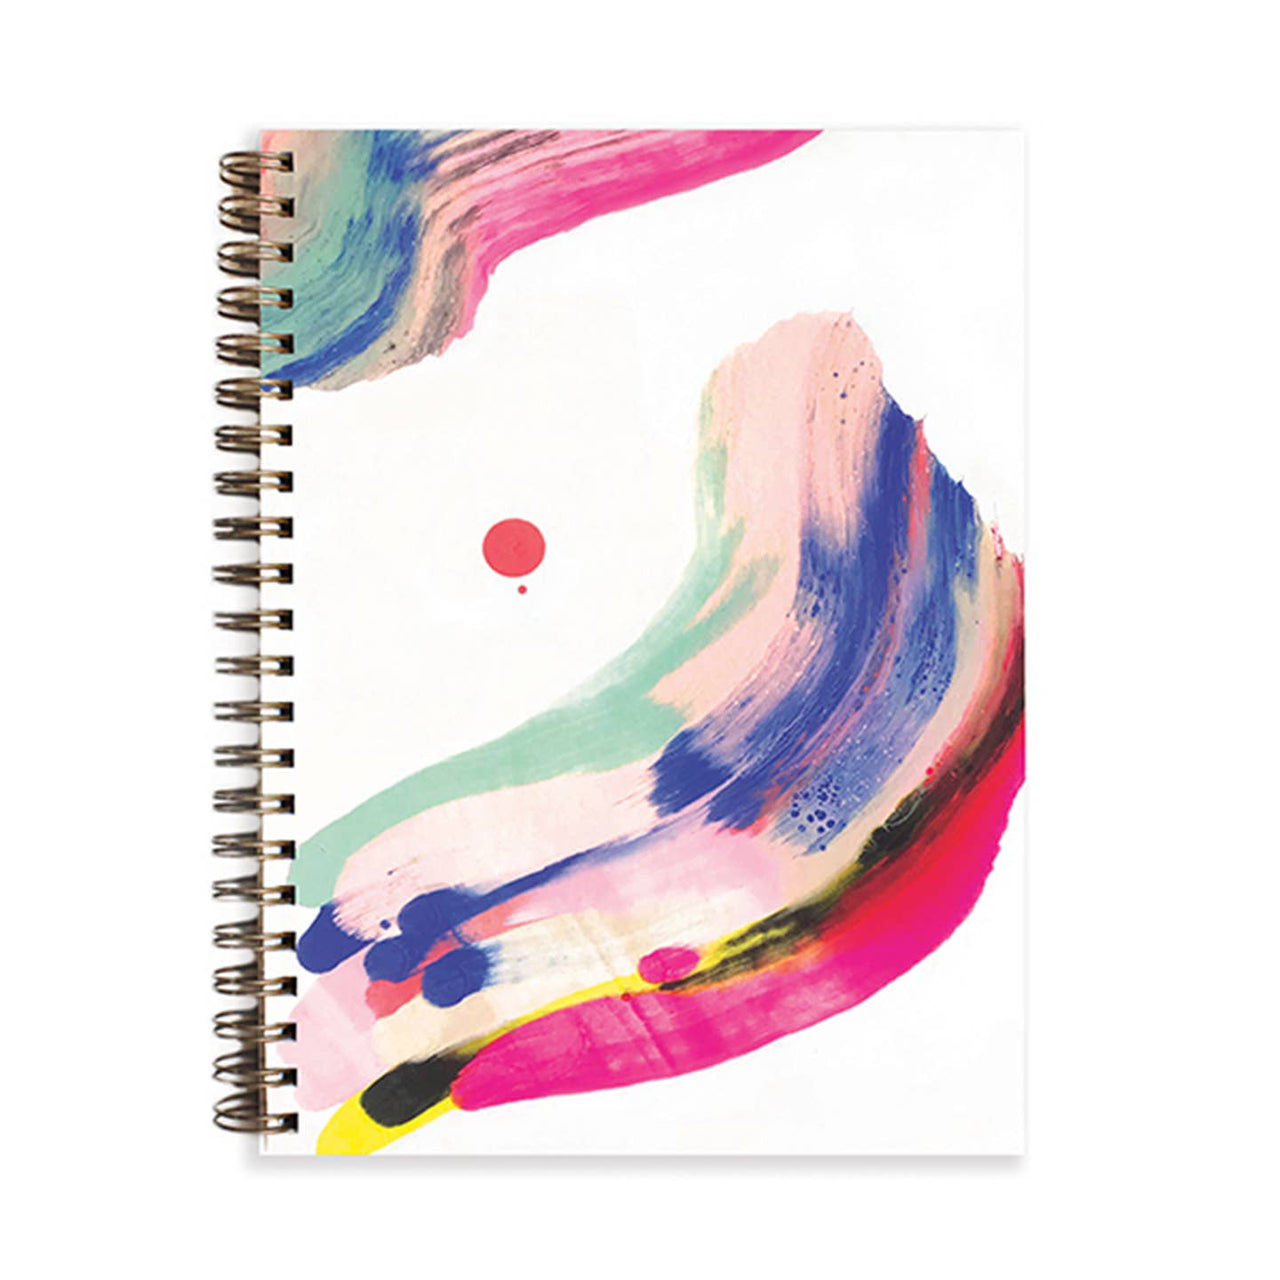 Candy Swirl Painted Journal - Lined